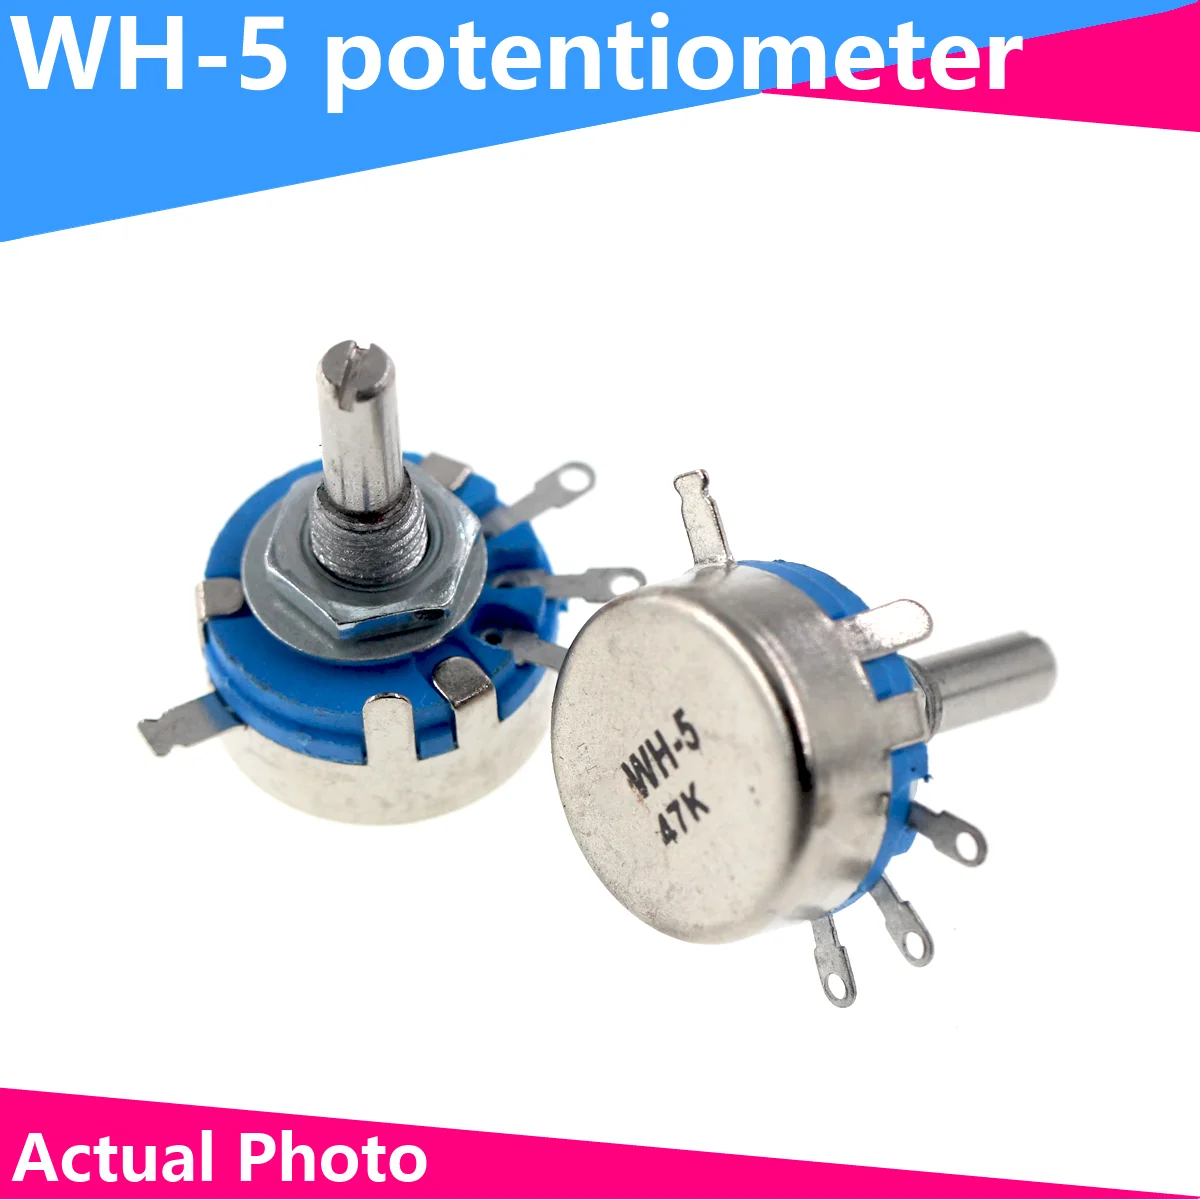 2PCS WH5-1A 470R 1K 10K 47K 4K7 100K 470K 220K 1K5 22K 1M ohm 3-Terminals Round Shaft Rotary Taper Carbon Potentiometer WH5 2pcs kcd4 ac 250v 16a red light 6p terminals on off double spst 2 way snap in boat rocker switch